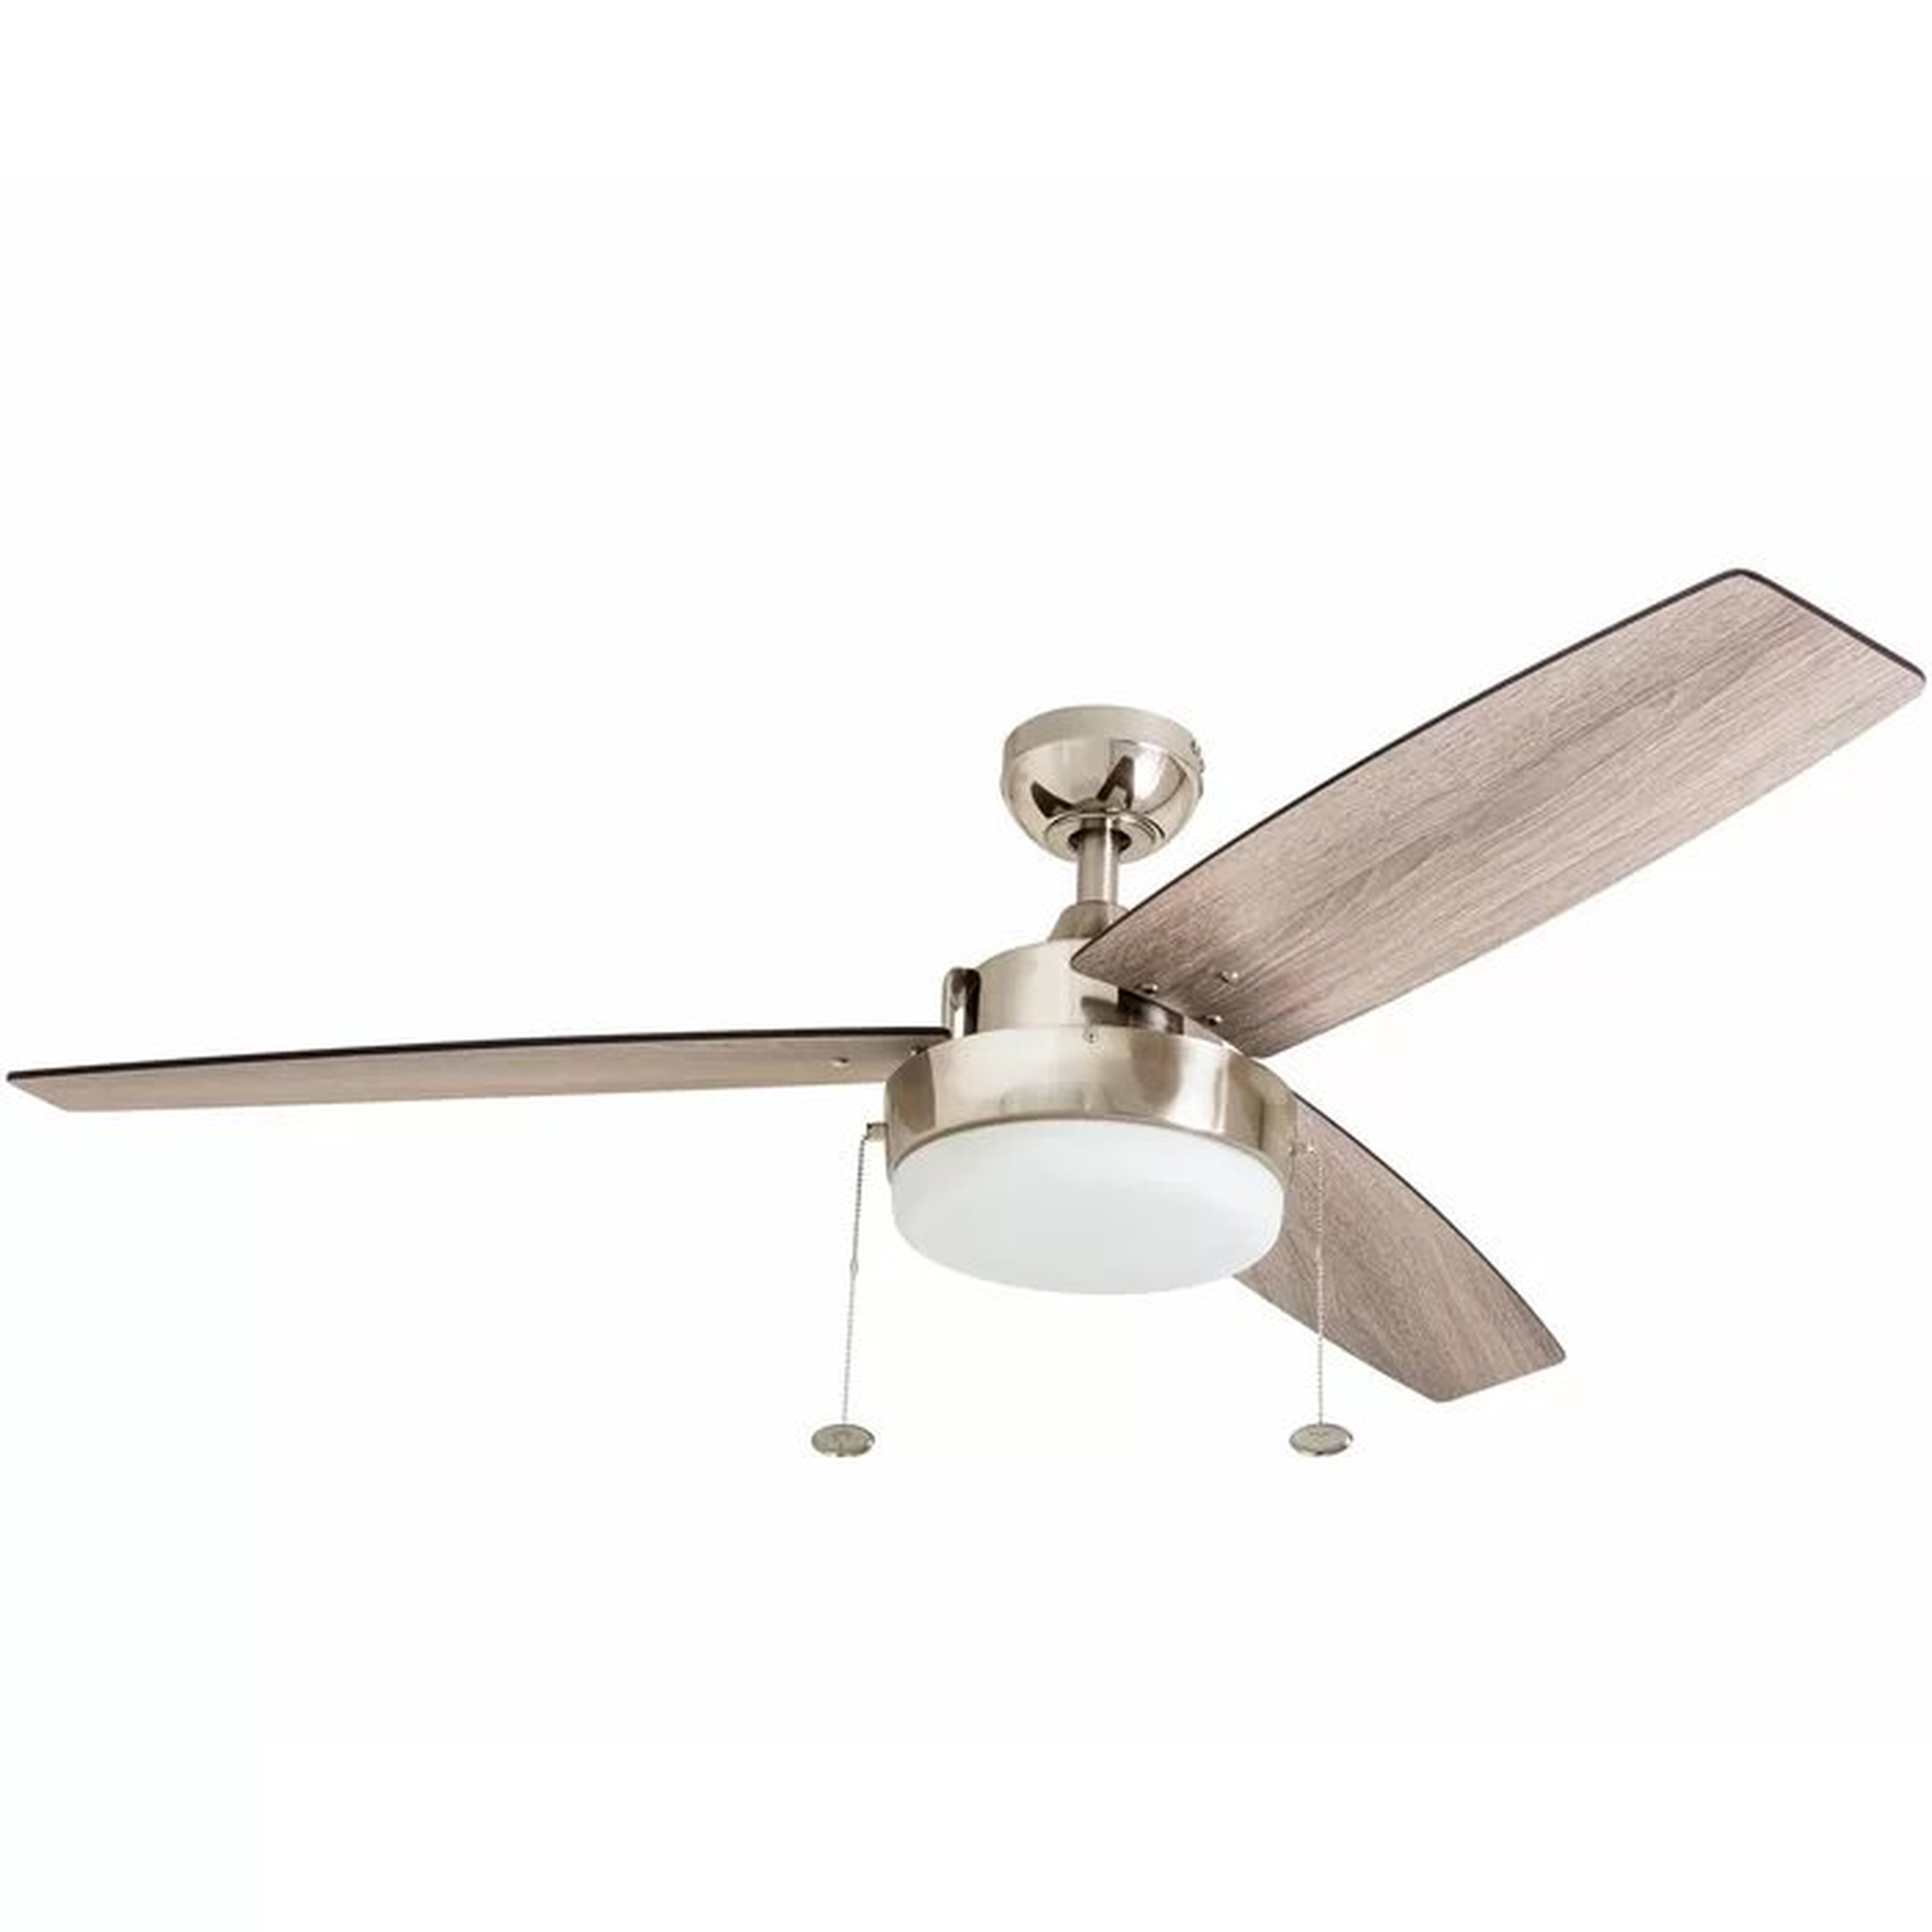 52'' Szymon 3 - Blade Propeller Ceiling Fan with Pull Chain and Light Kit Included - Wayfair